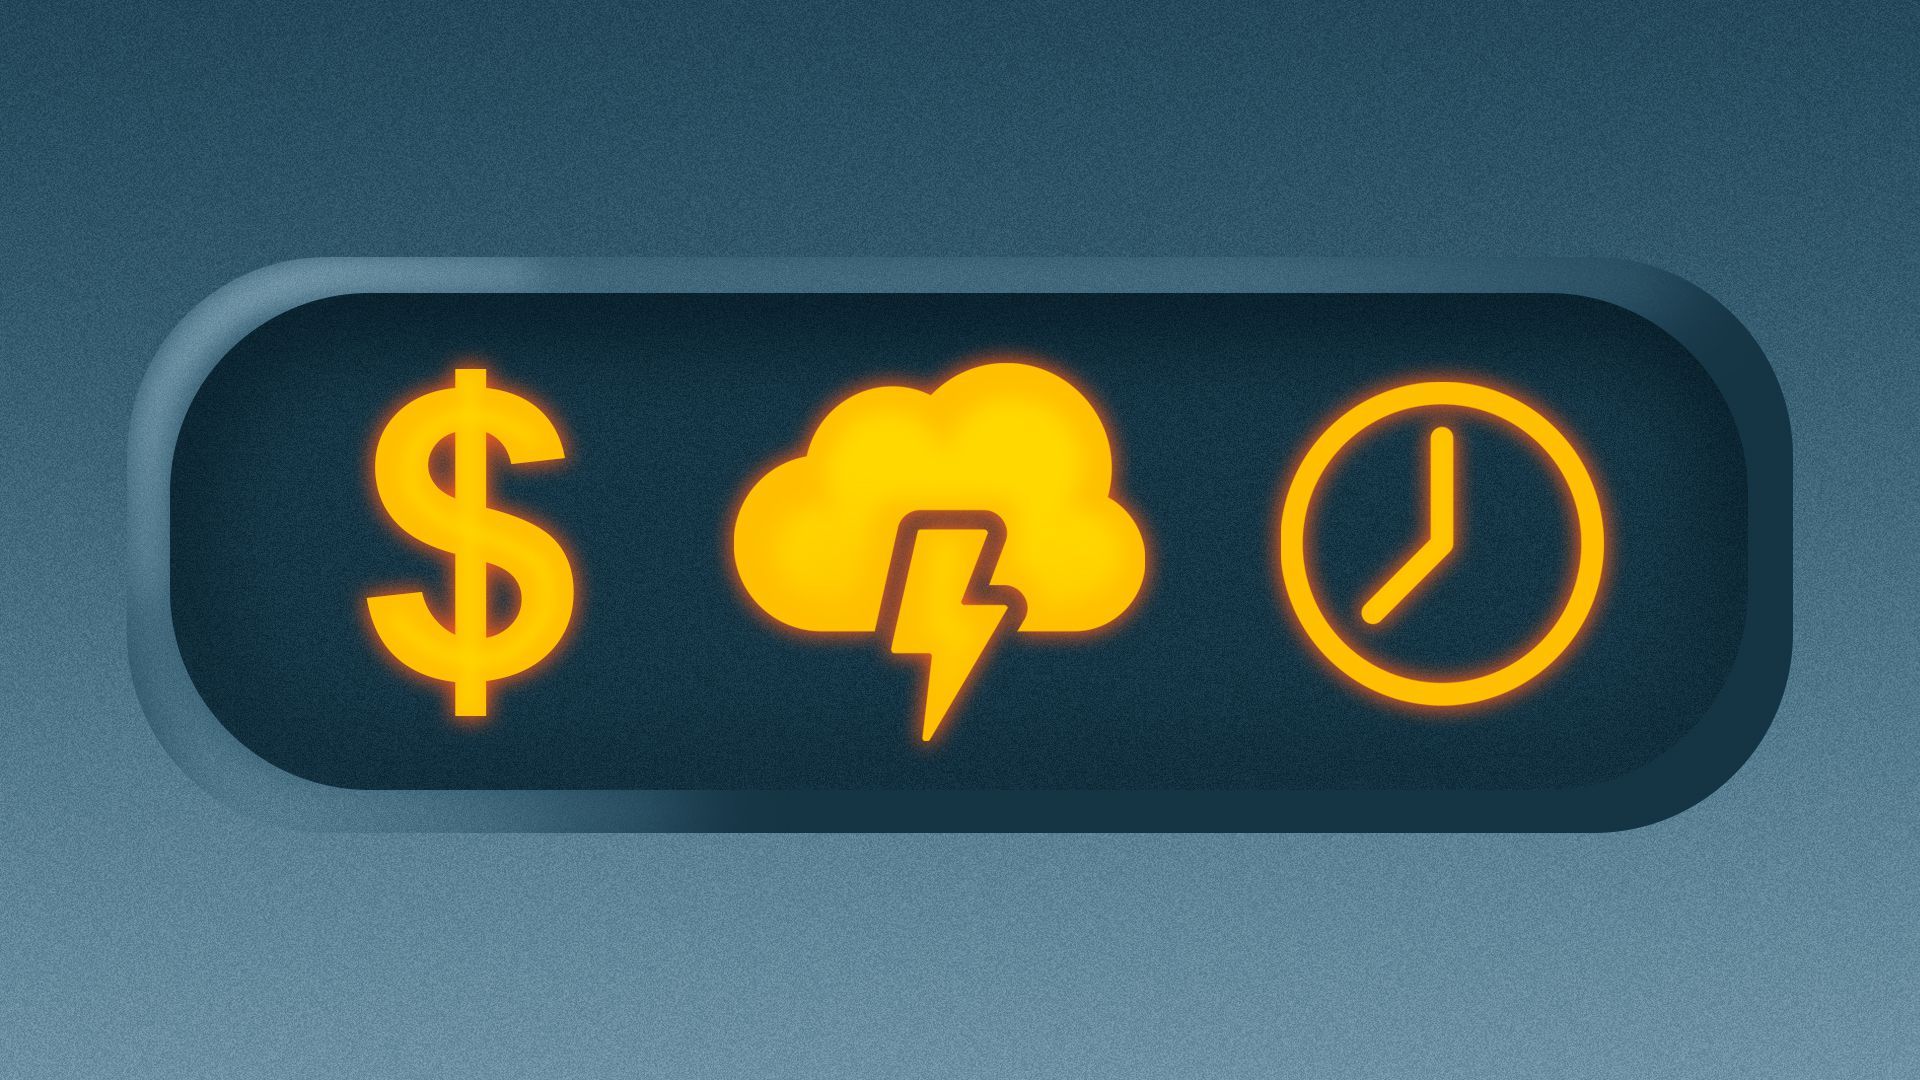 Illustration of an overhead panel on a plane with a dollar sign, storm cloud, and clock